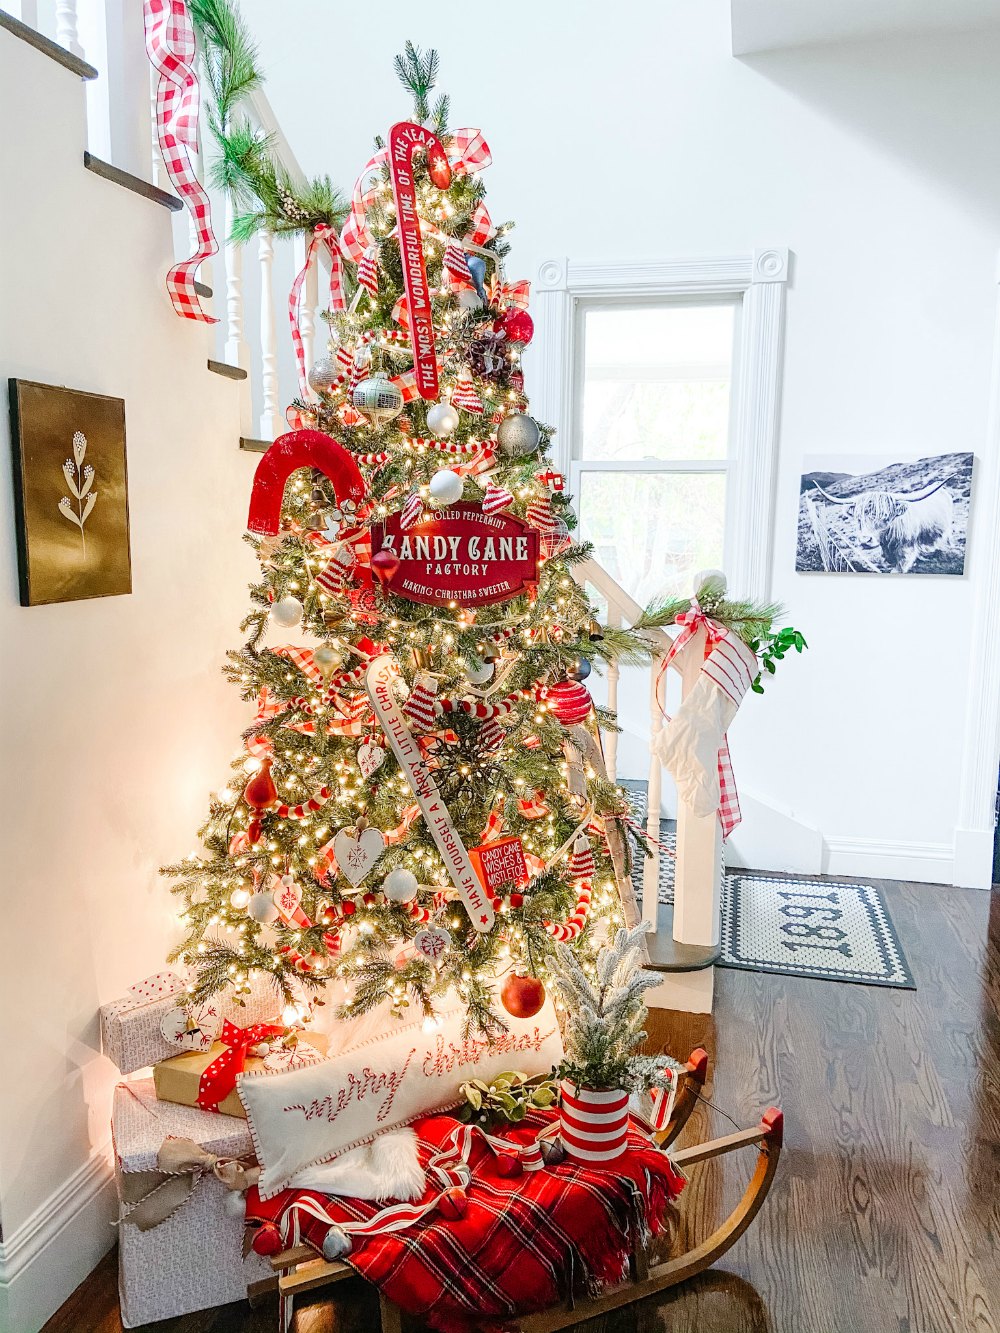 15 Themed Christmas Tree Decorating Ideas. Create a gorgeous themed Christmas tree with these easy and affordable ideas! 